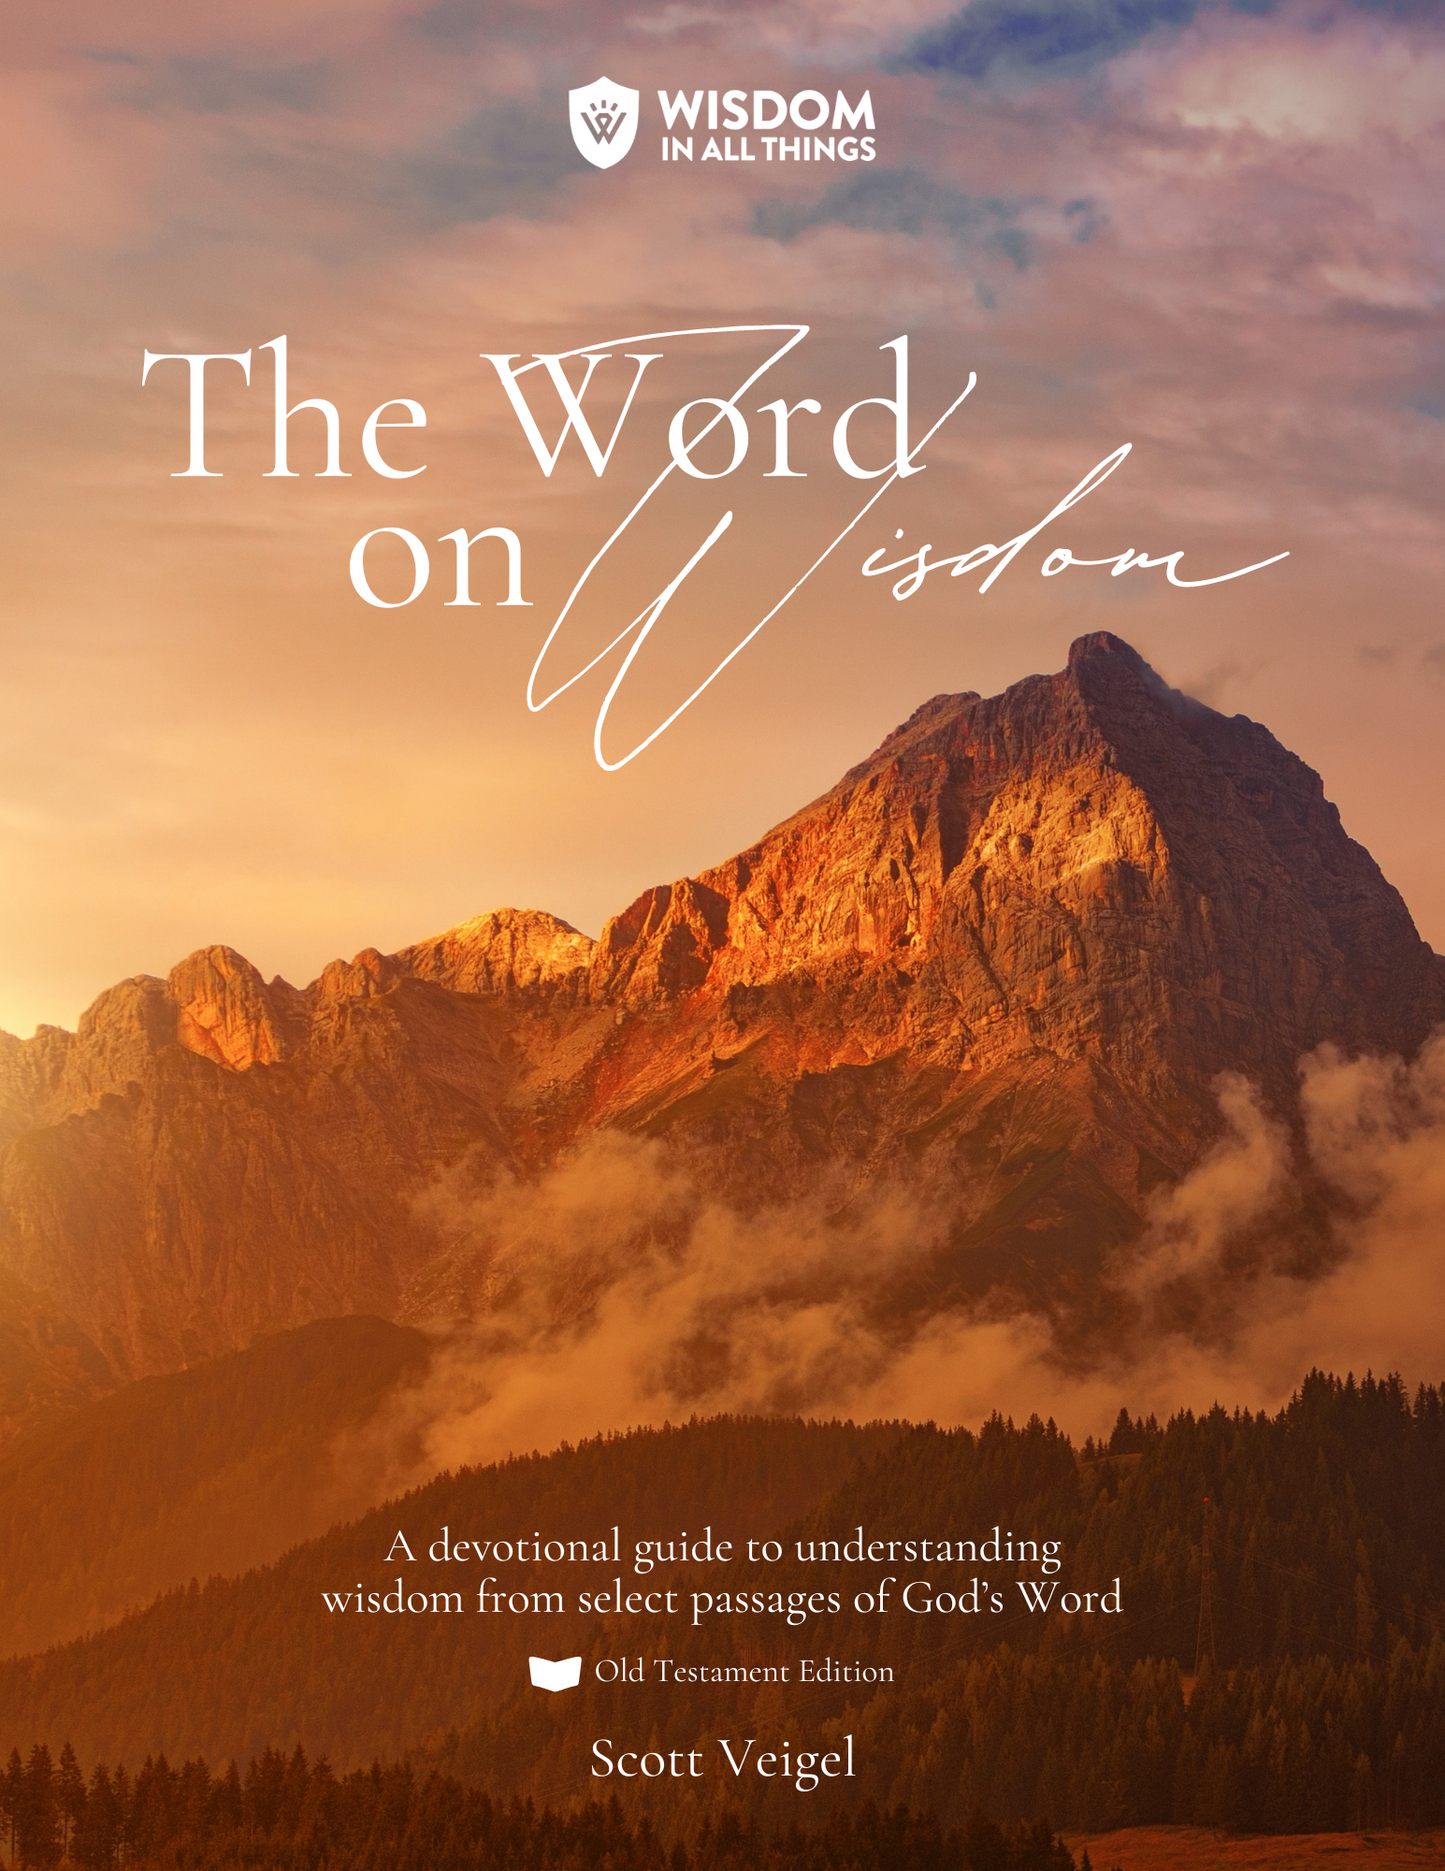 The Word on Wisdom - BOOK